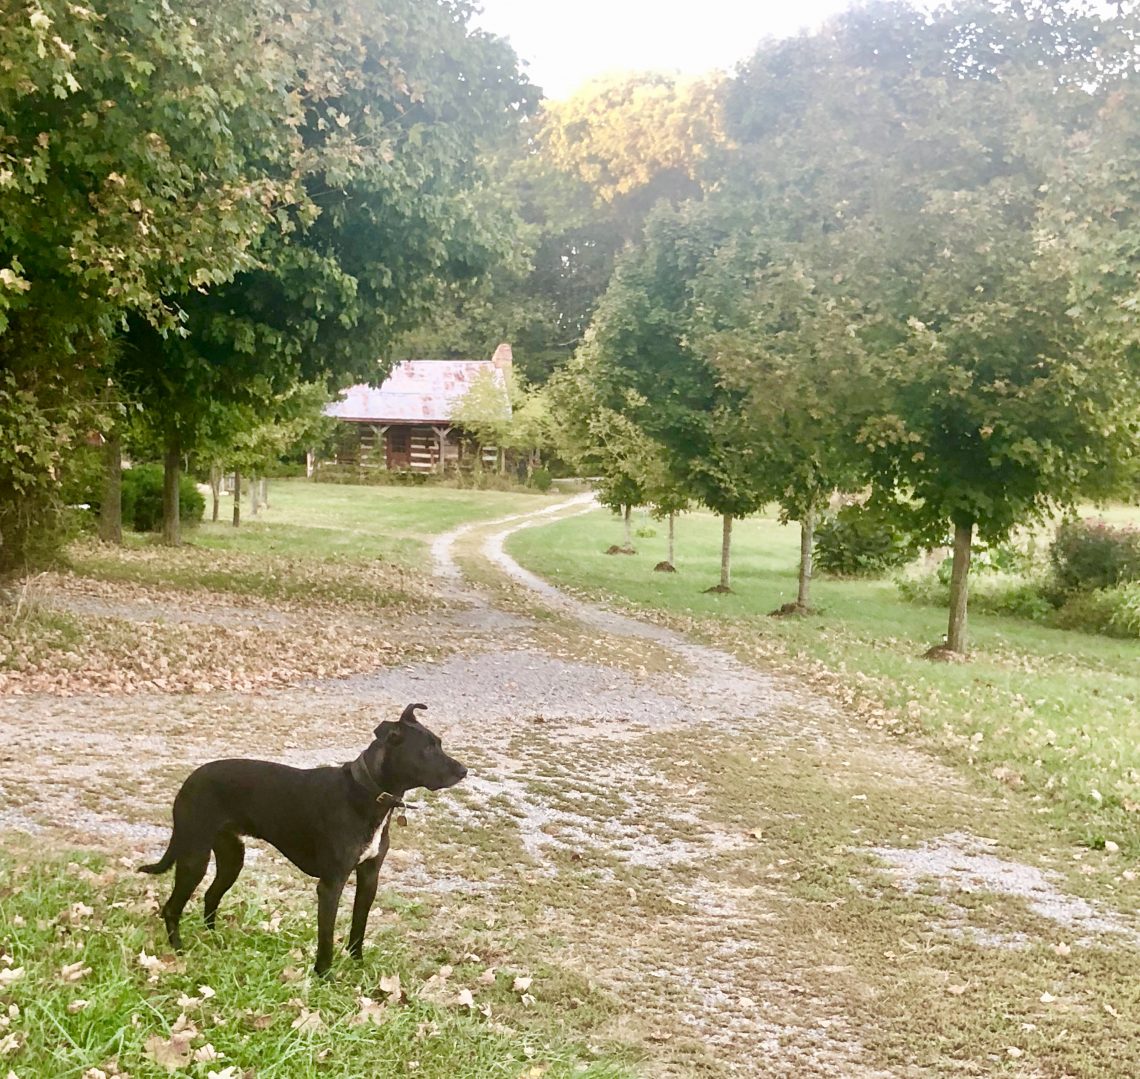 Authentic 1800's cabins for rent by Shawnee National Forest at the Olde Squat Inn , #petfriendly #cozy #rustic #quaint #historic #bedandbreakfast #fishingpond #cabinrentals #shawneenationalforest